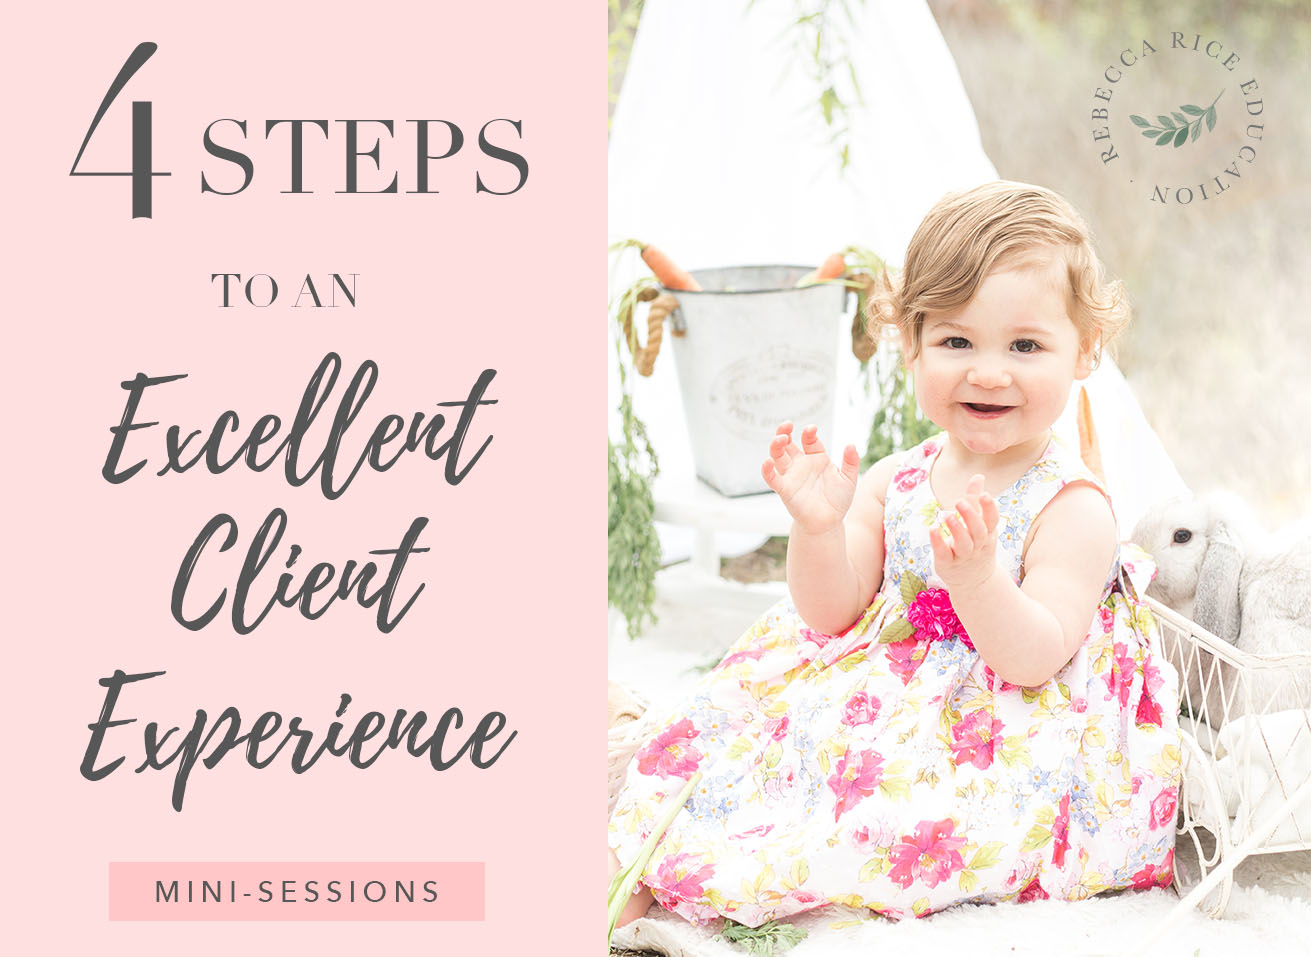 4 steps to an excellent client experience mini-sessions minis rebecca rice education bunny minis easter